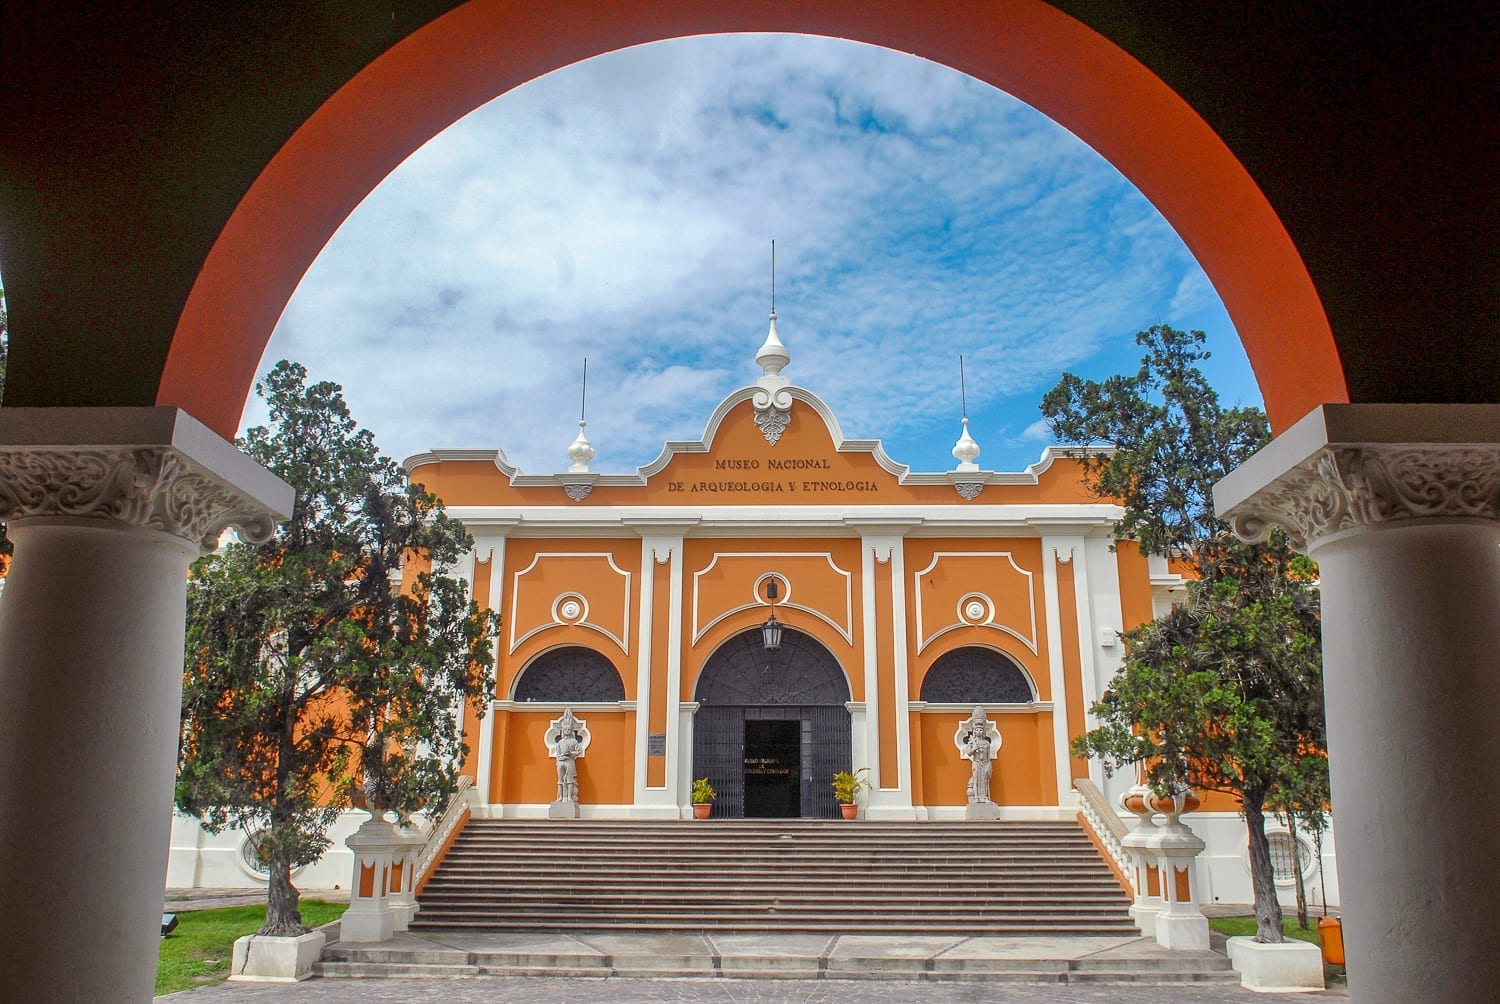 🚢 Journey Around the World in 24 Questions – How Well Can You Score? National Museum of Archaeology and Ethnology, Guatemala City